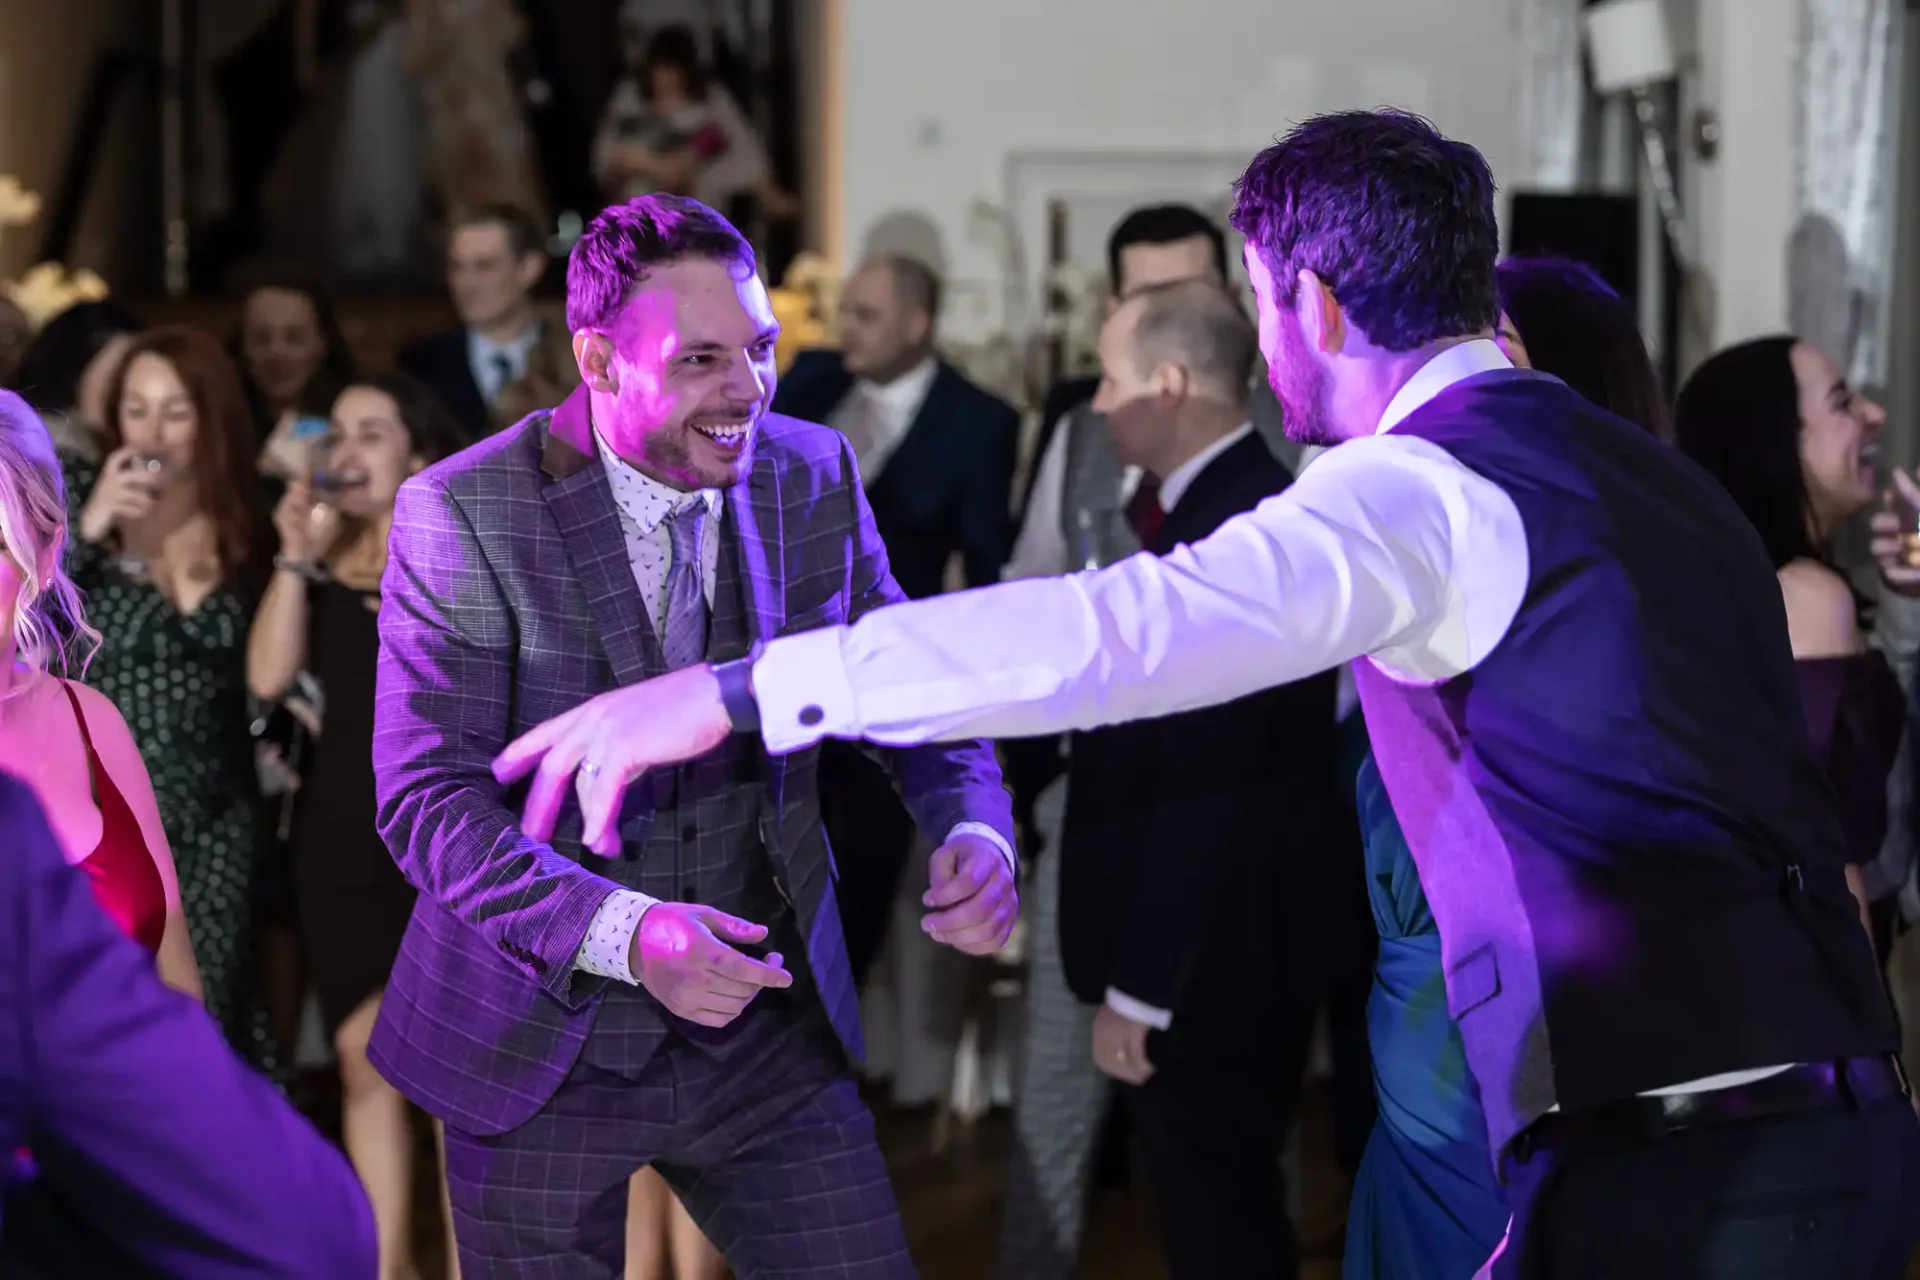 Two men dancing joyfully at a lively party with guests clapping around them.